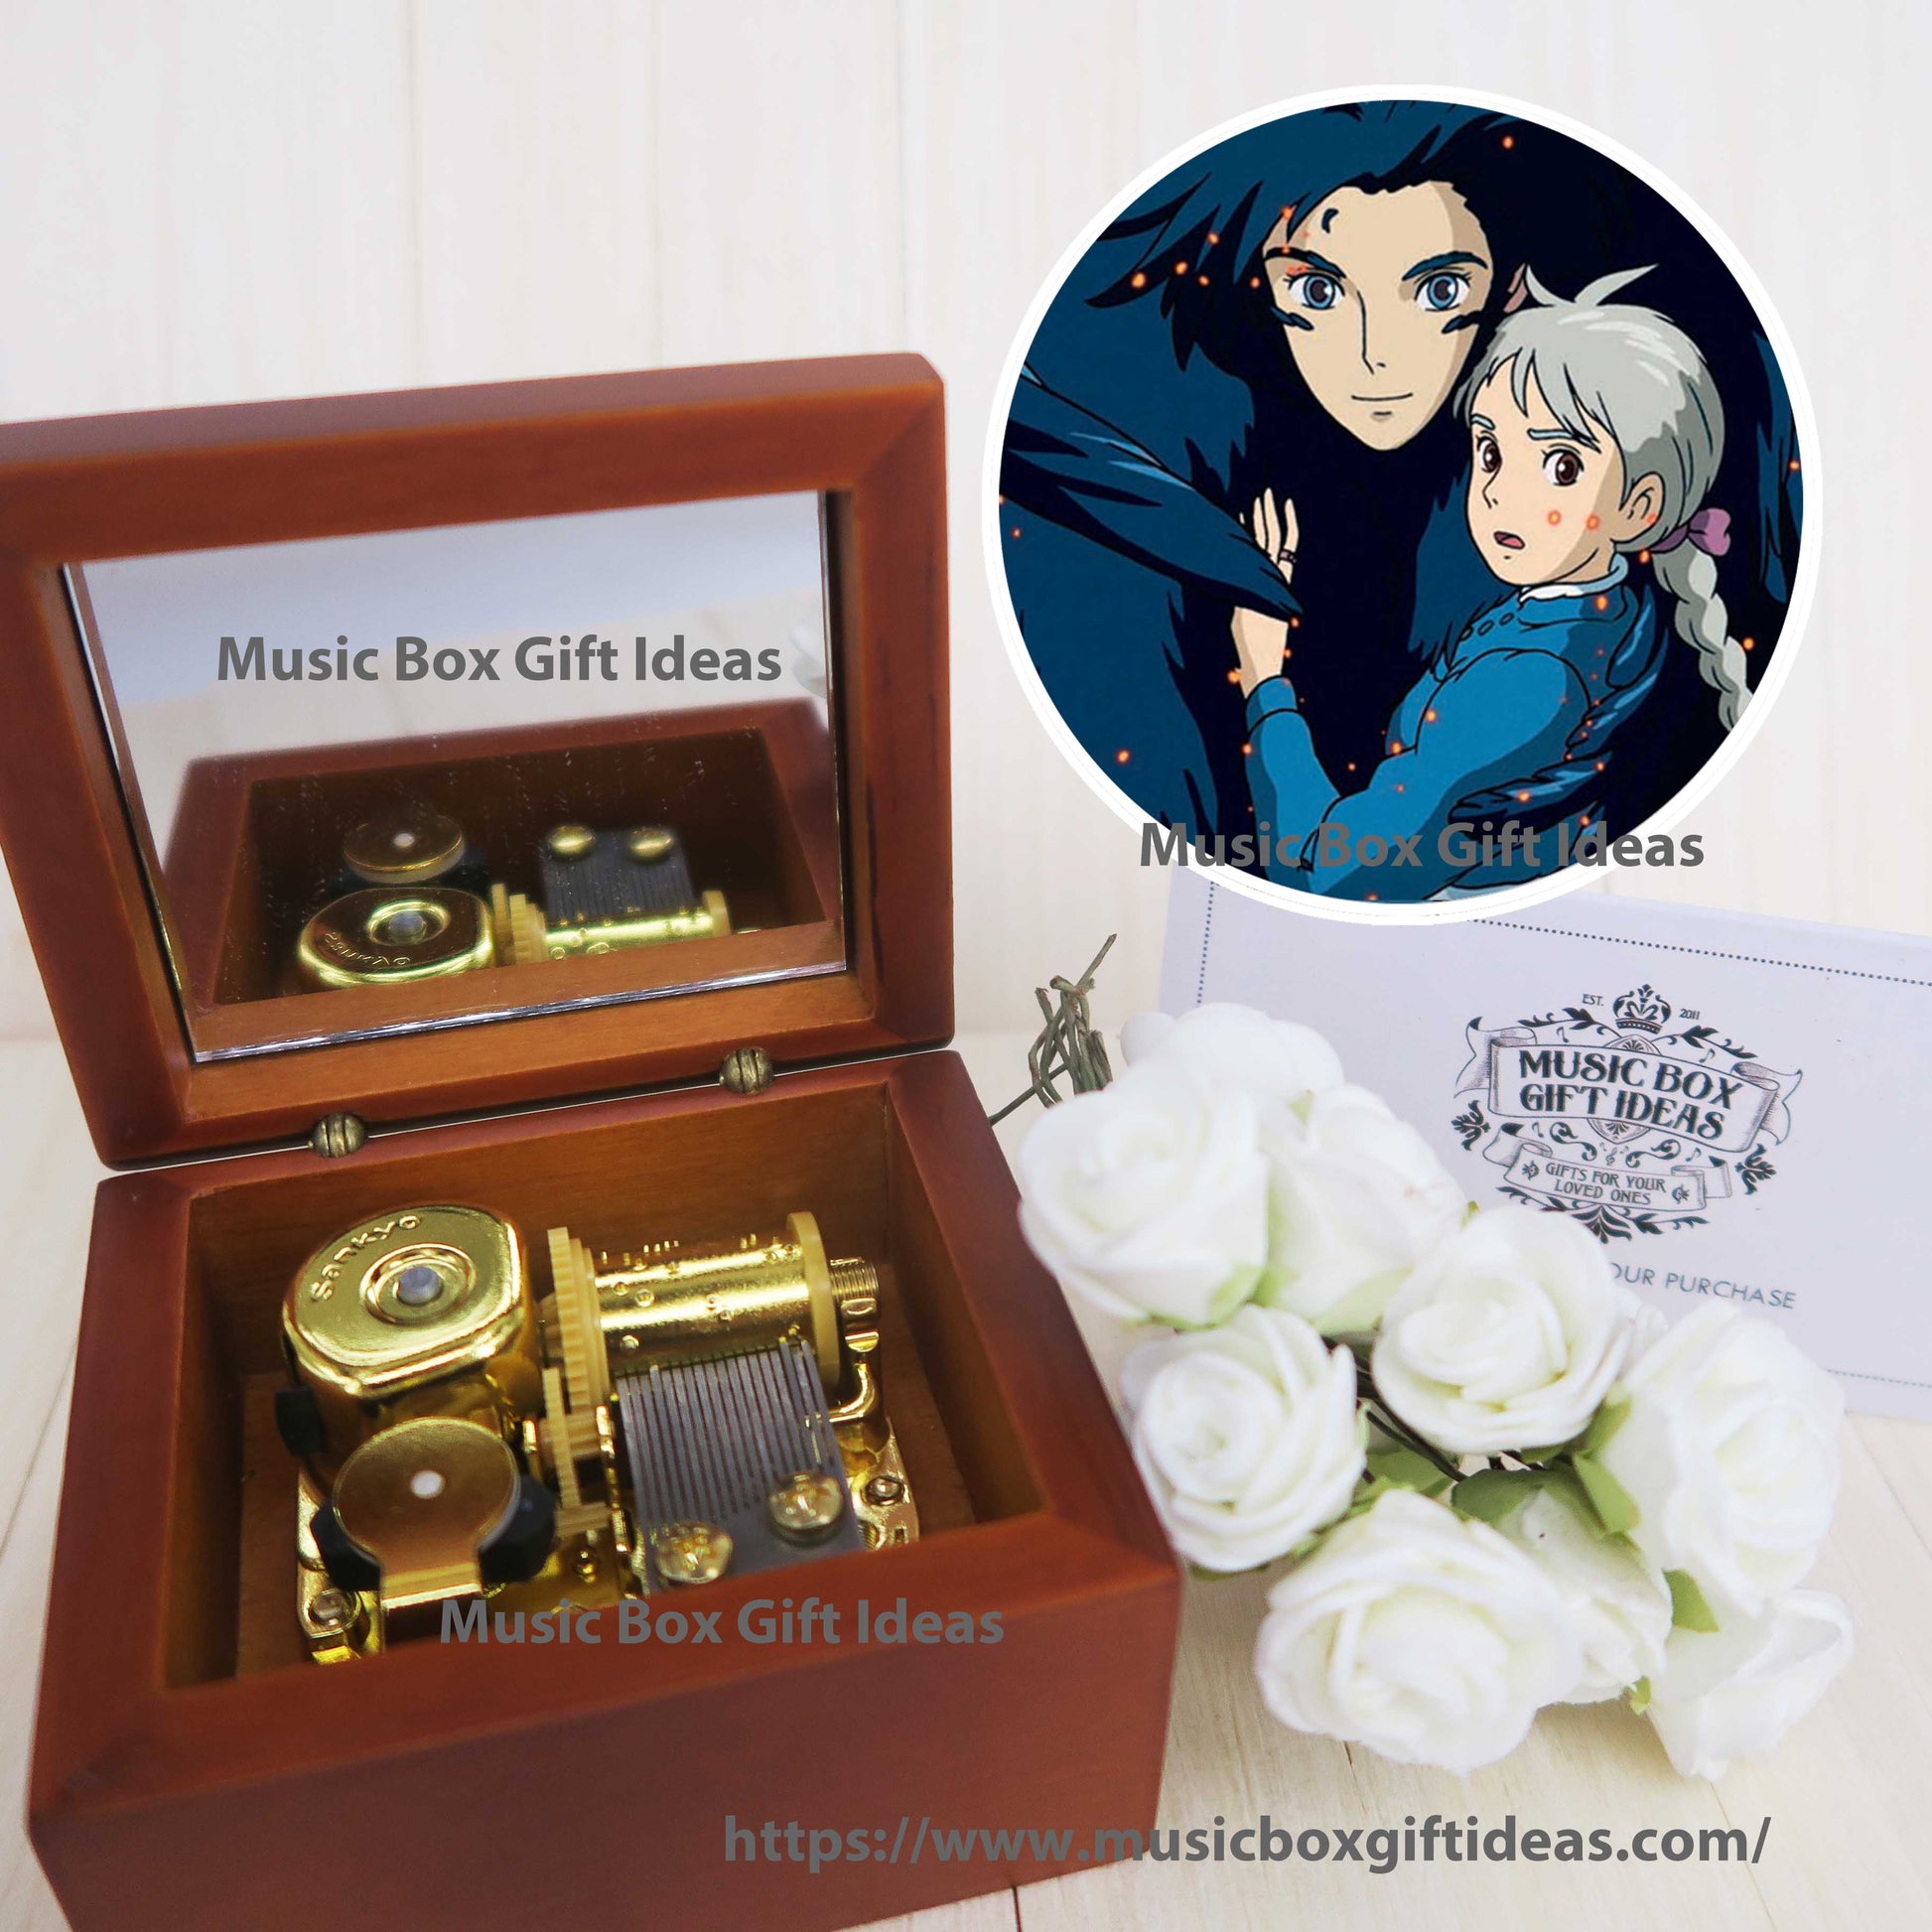 Howl's Moving Castle Merry Go Round of Life from Studio Ghibli 18-Note Music Box Gift (Wooden Clockwork) - Music Box Gift Ideas